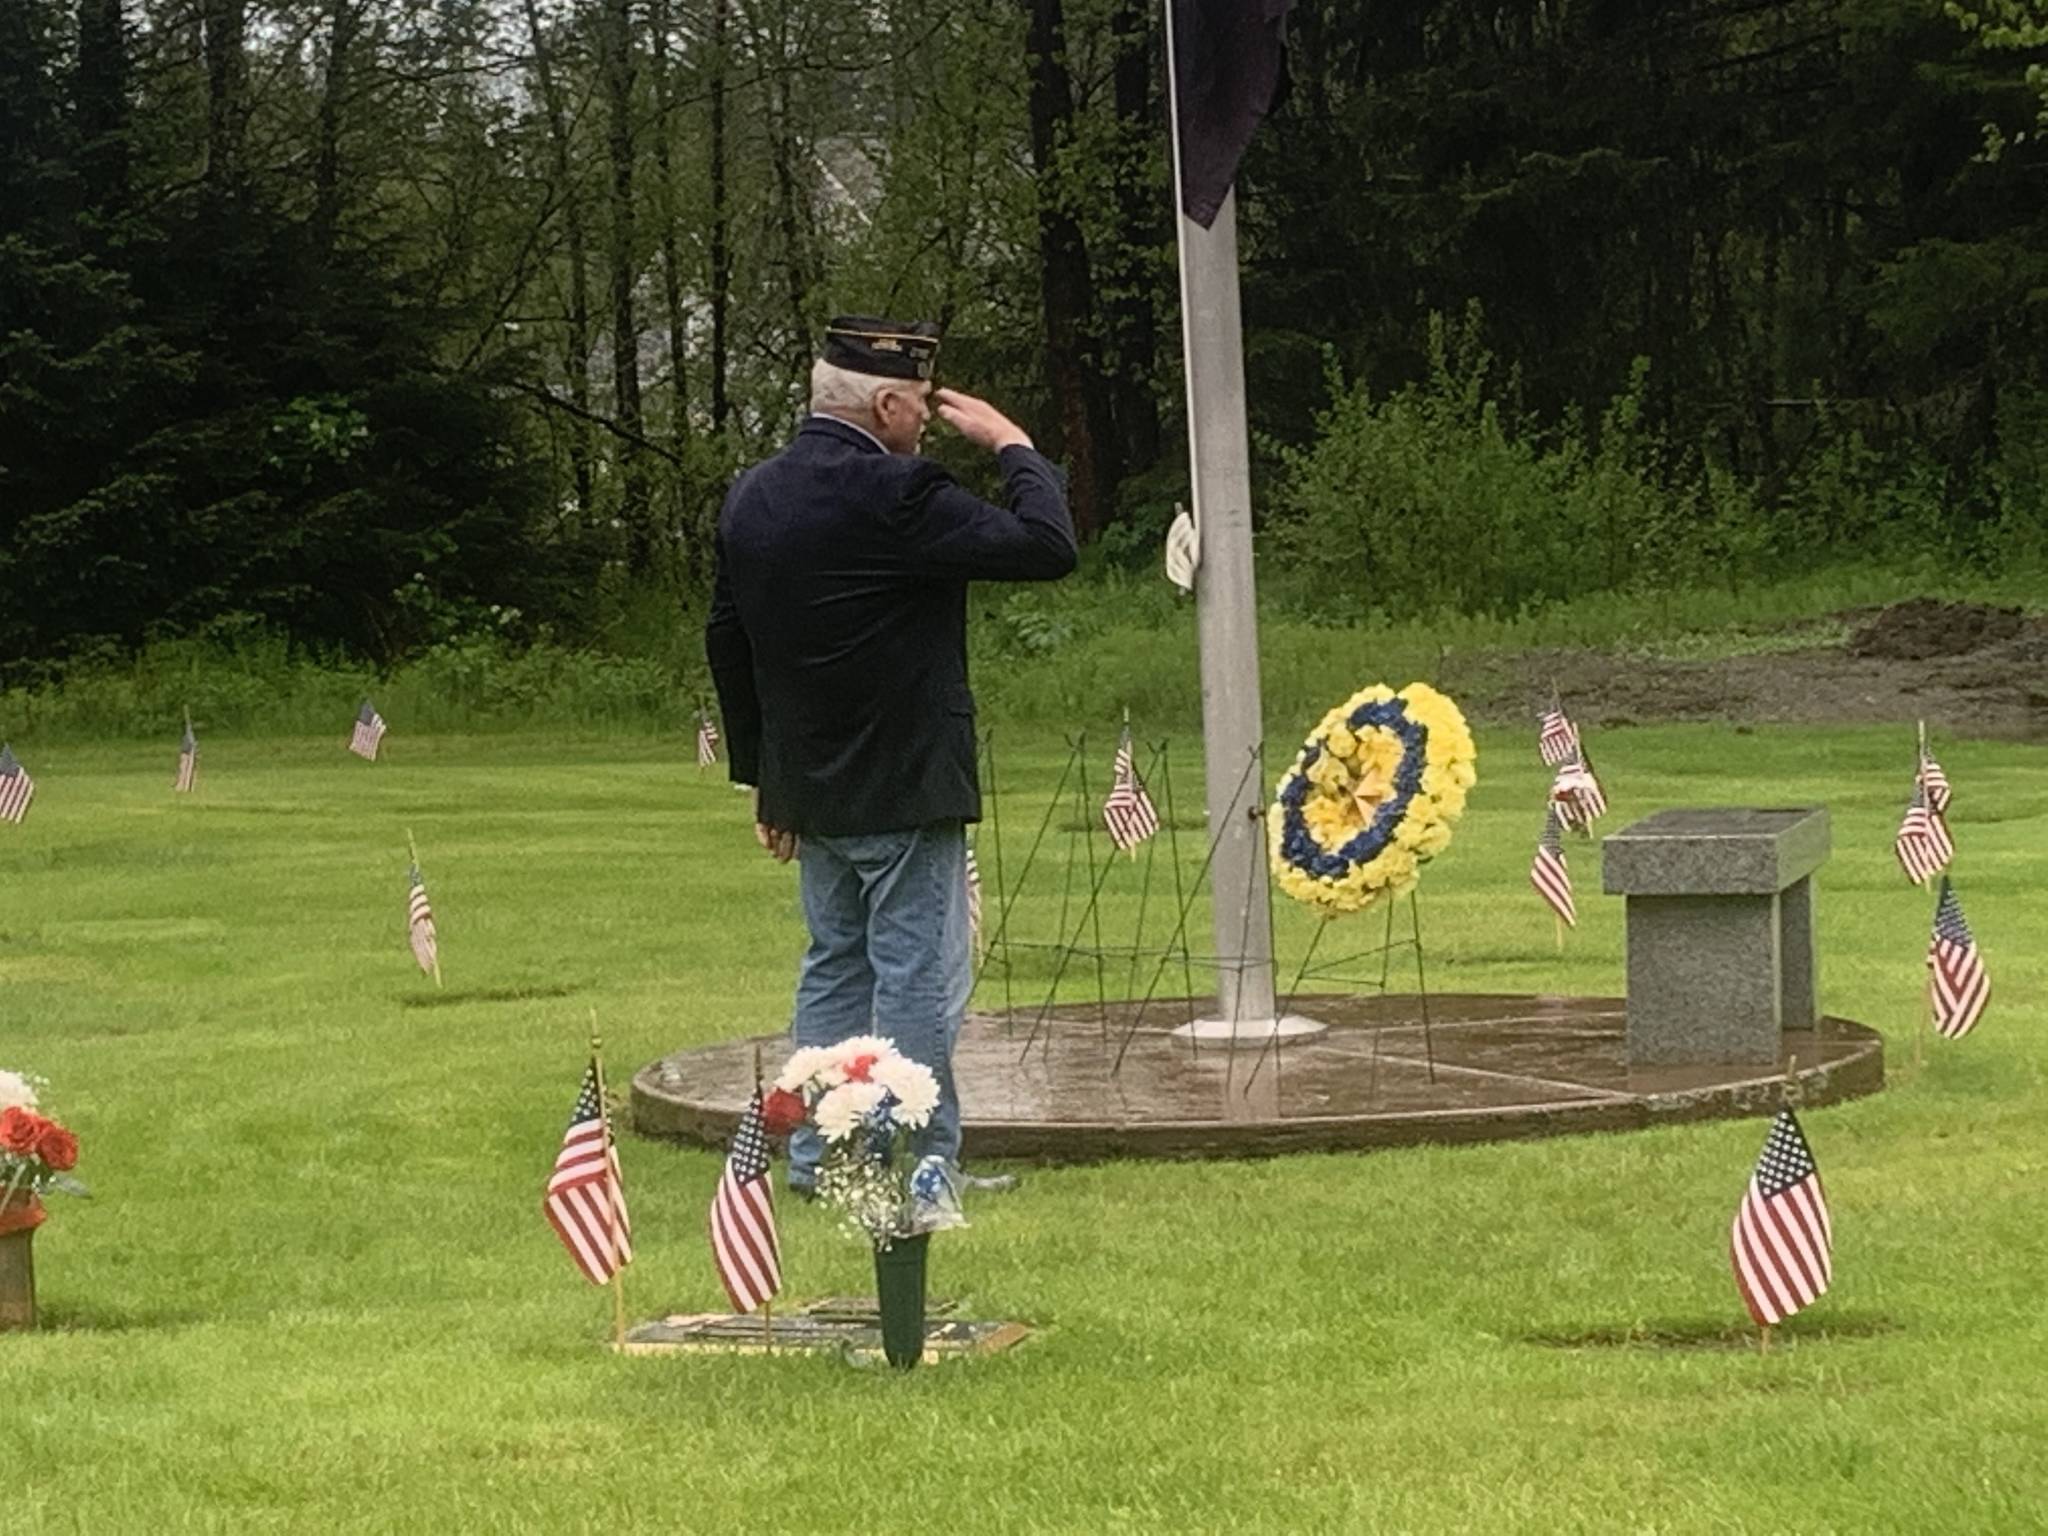 Dick Hand, a Coast Guard veteran, stands at salute after laying a wreath at Alaskan Memorial Park in remembrance of Americans who gave their lives for the country on Memorial Day, May 31, 2021. (Dana Zigmund / Juneau Empire)